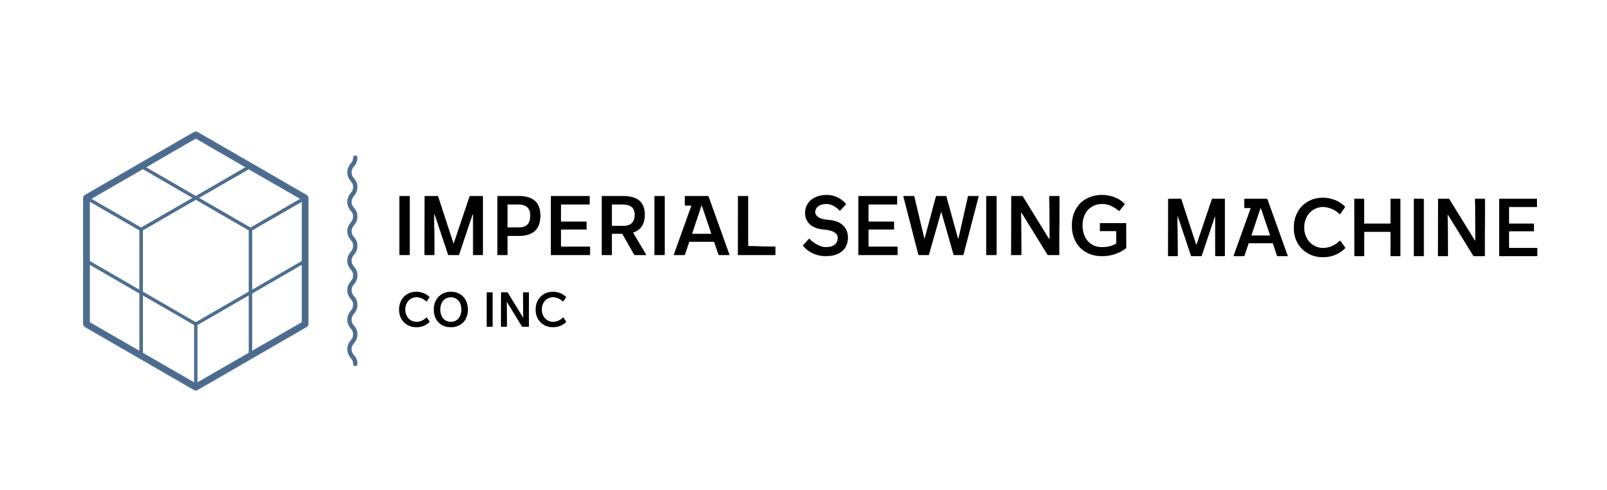 imperial sewing machine co inc black logo with abstract square